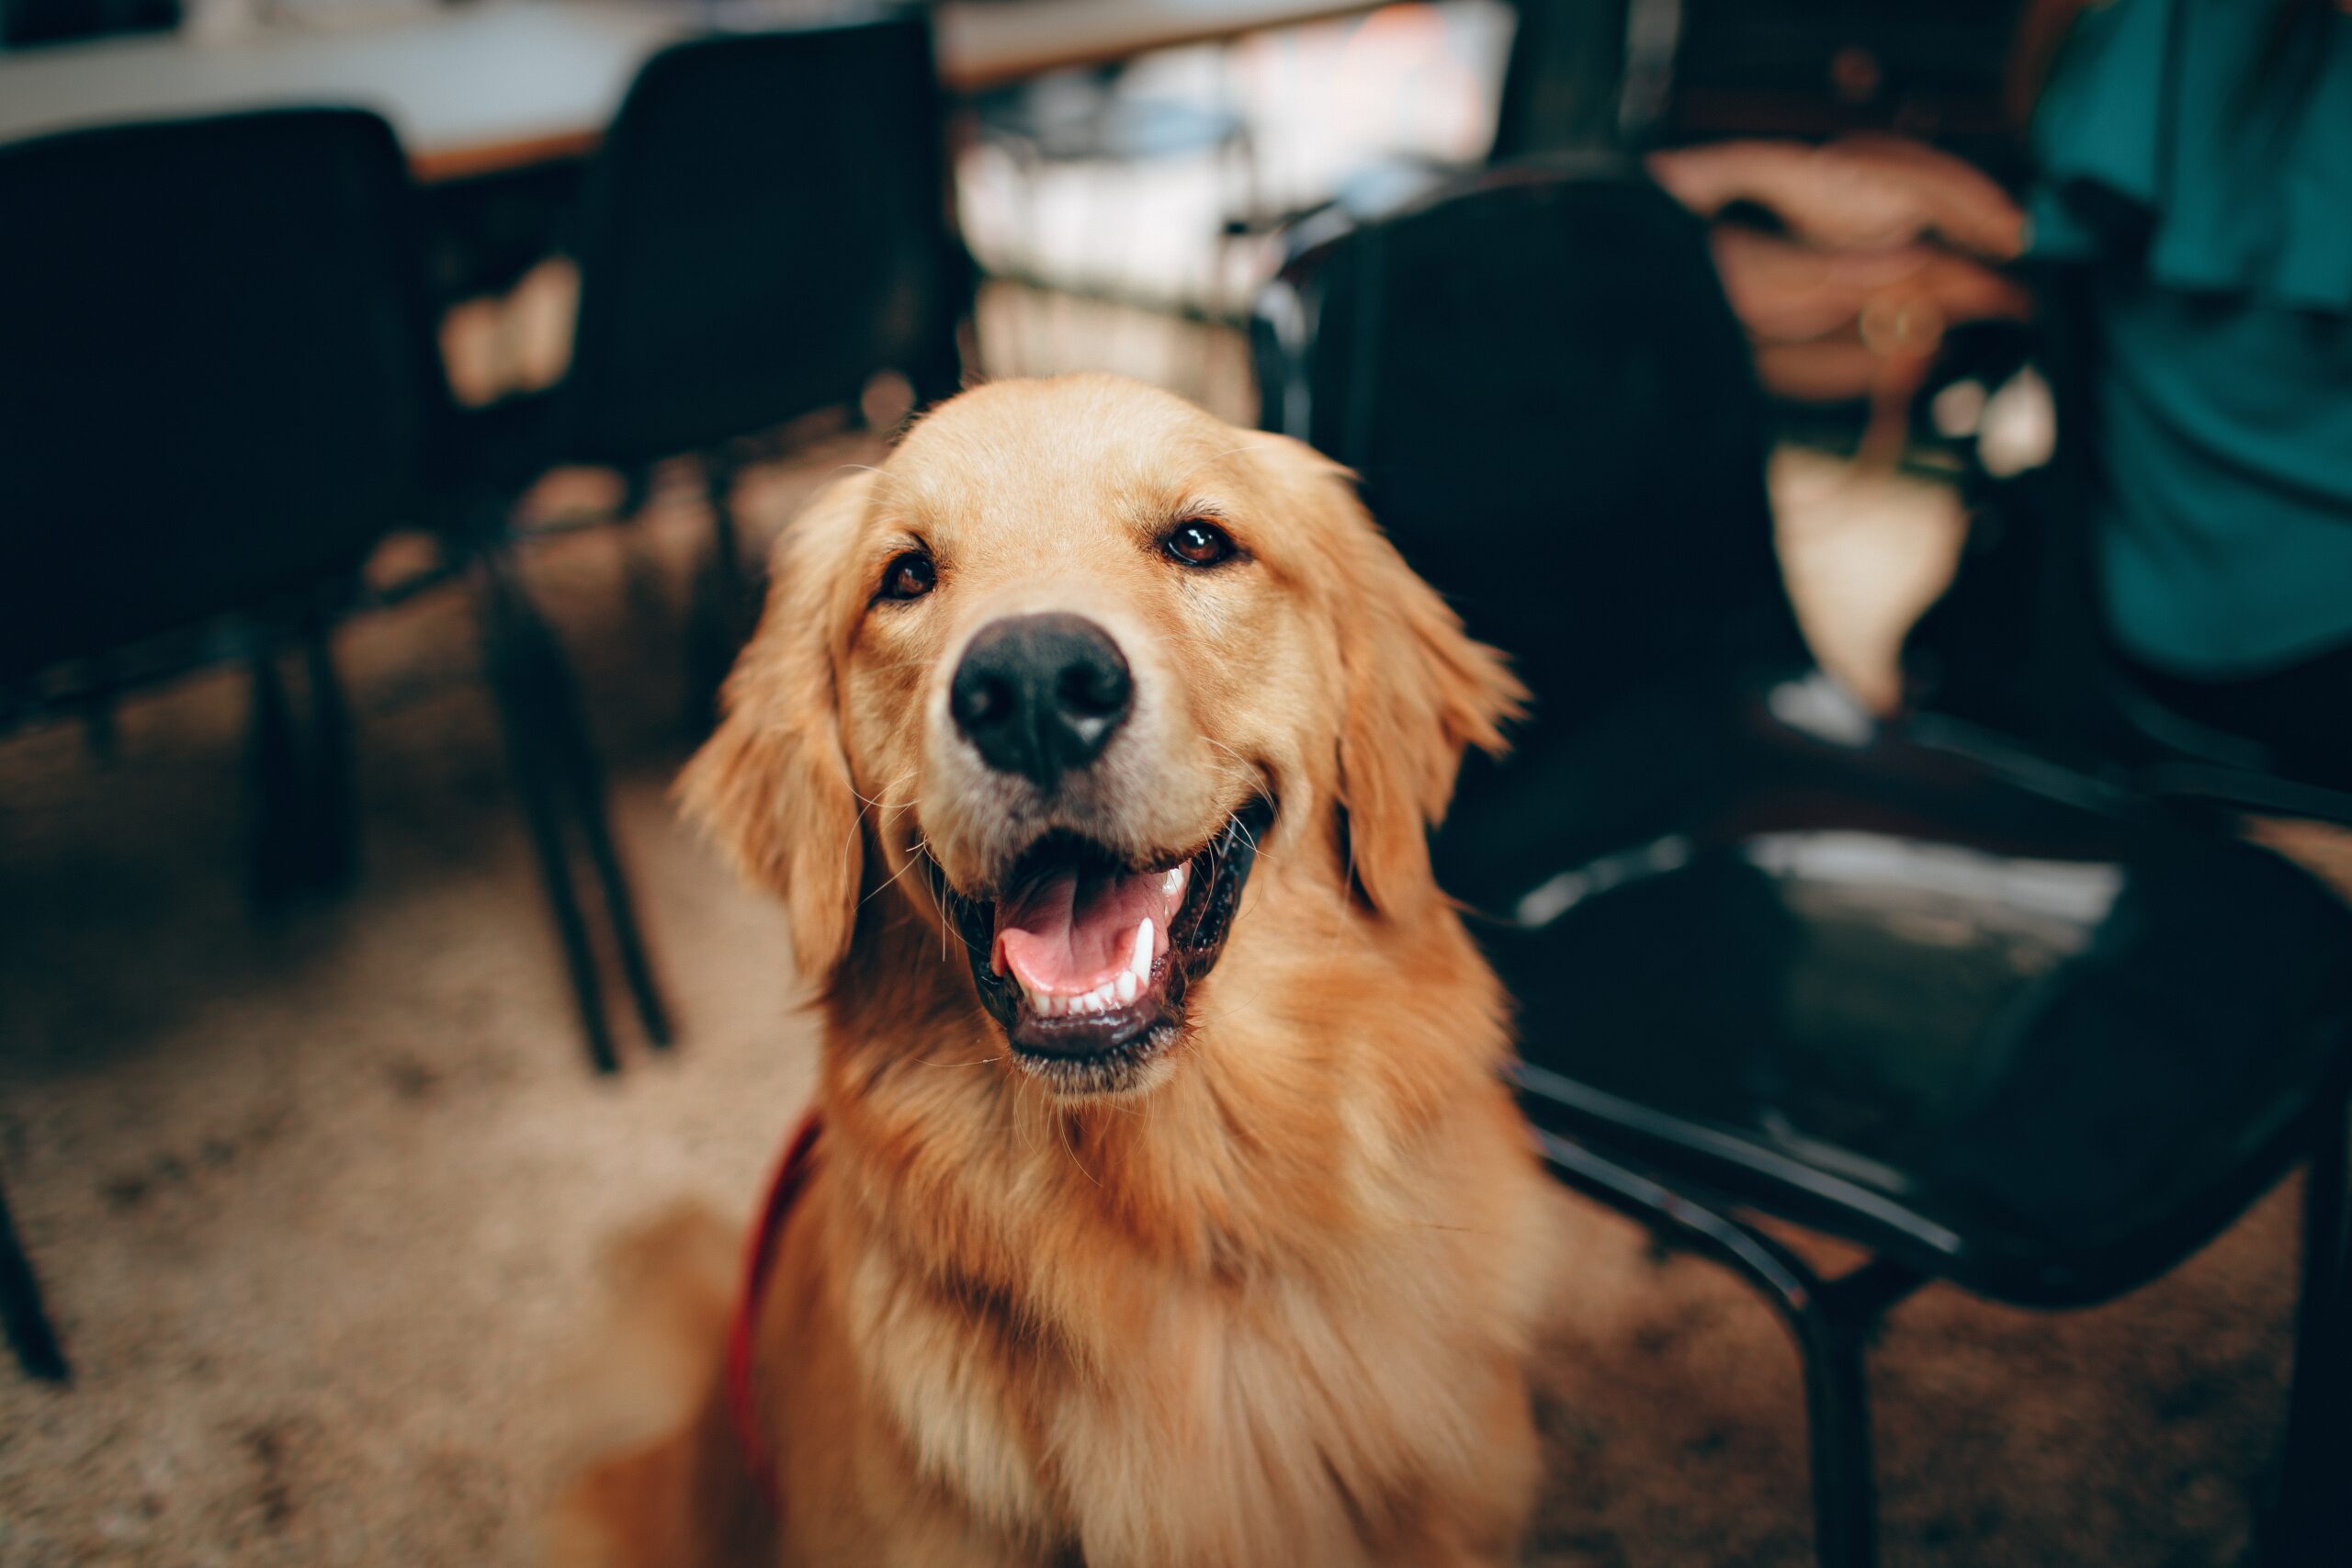 Golden Retriever smiling in an office space